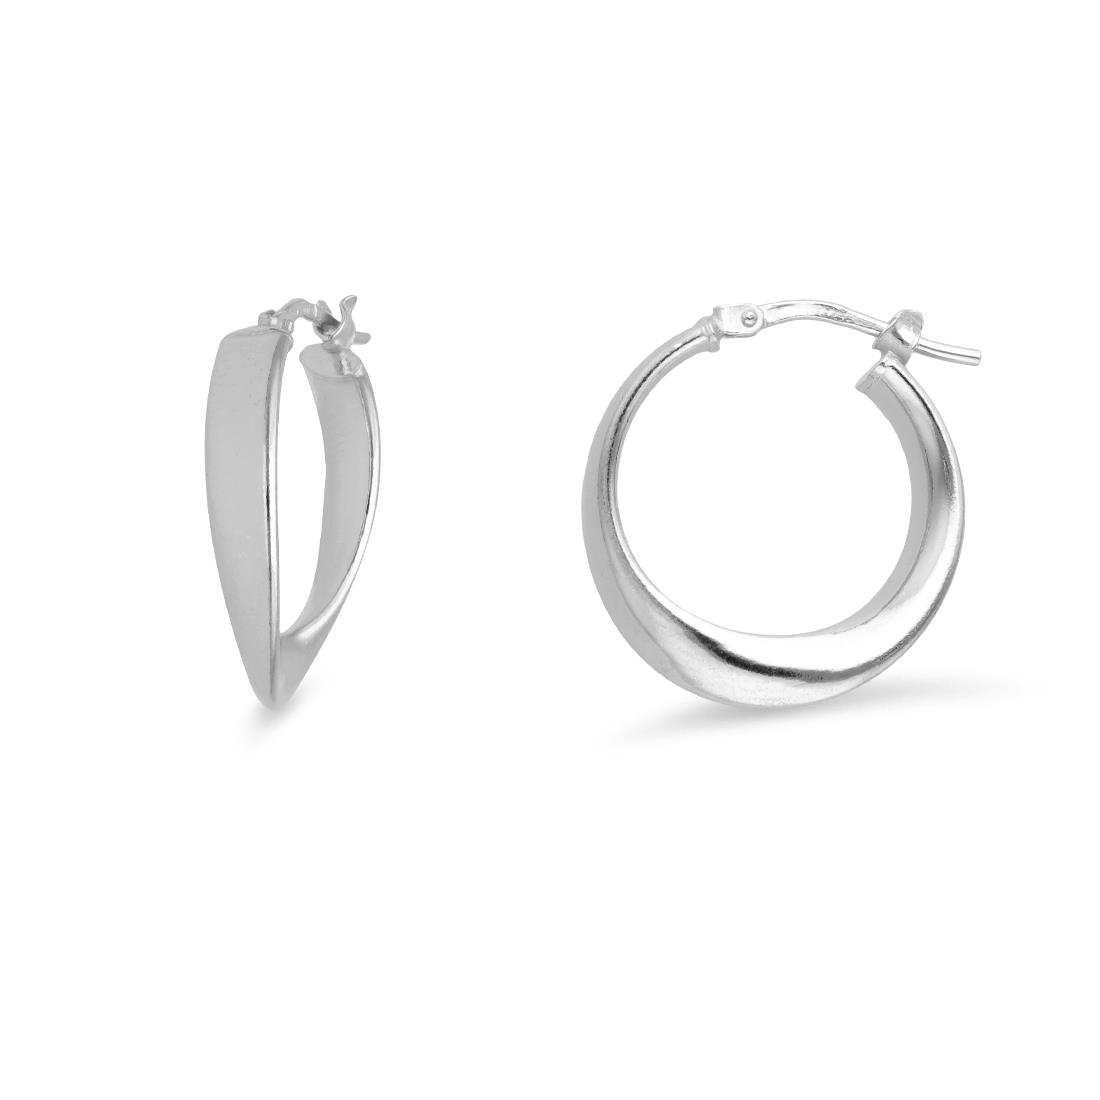 Hula Hoop collection rounded hoop earrings in 925 rhodium-plated silver - LUXURY MILANO